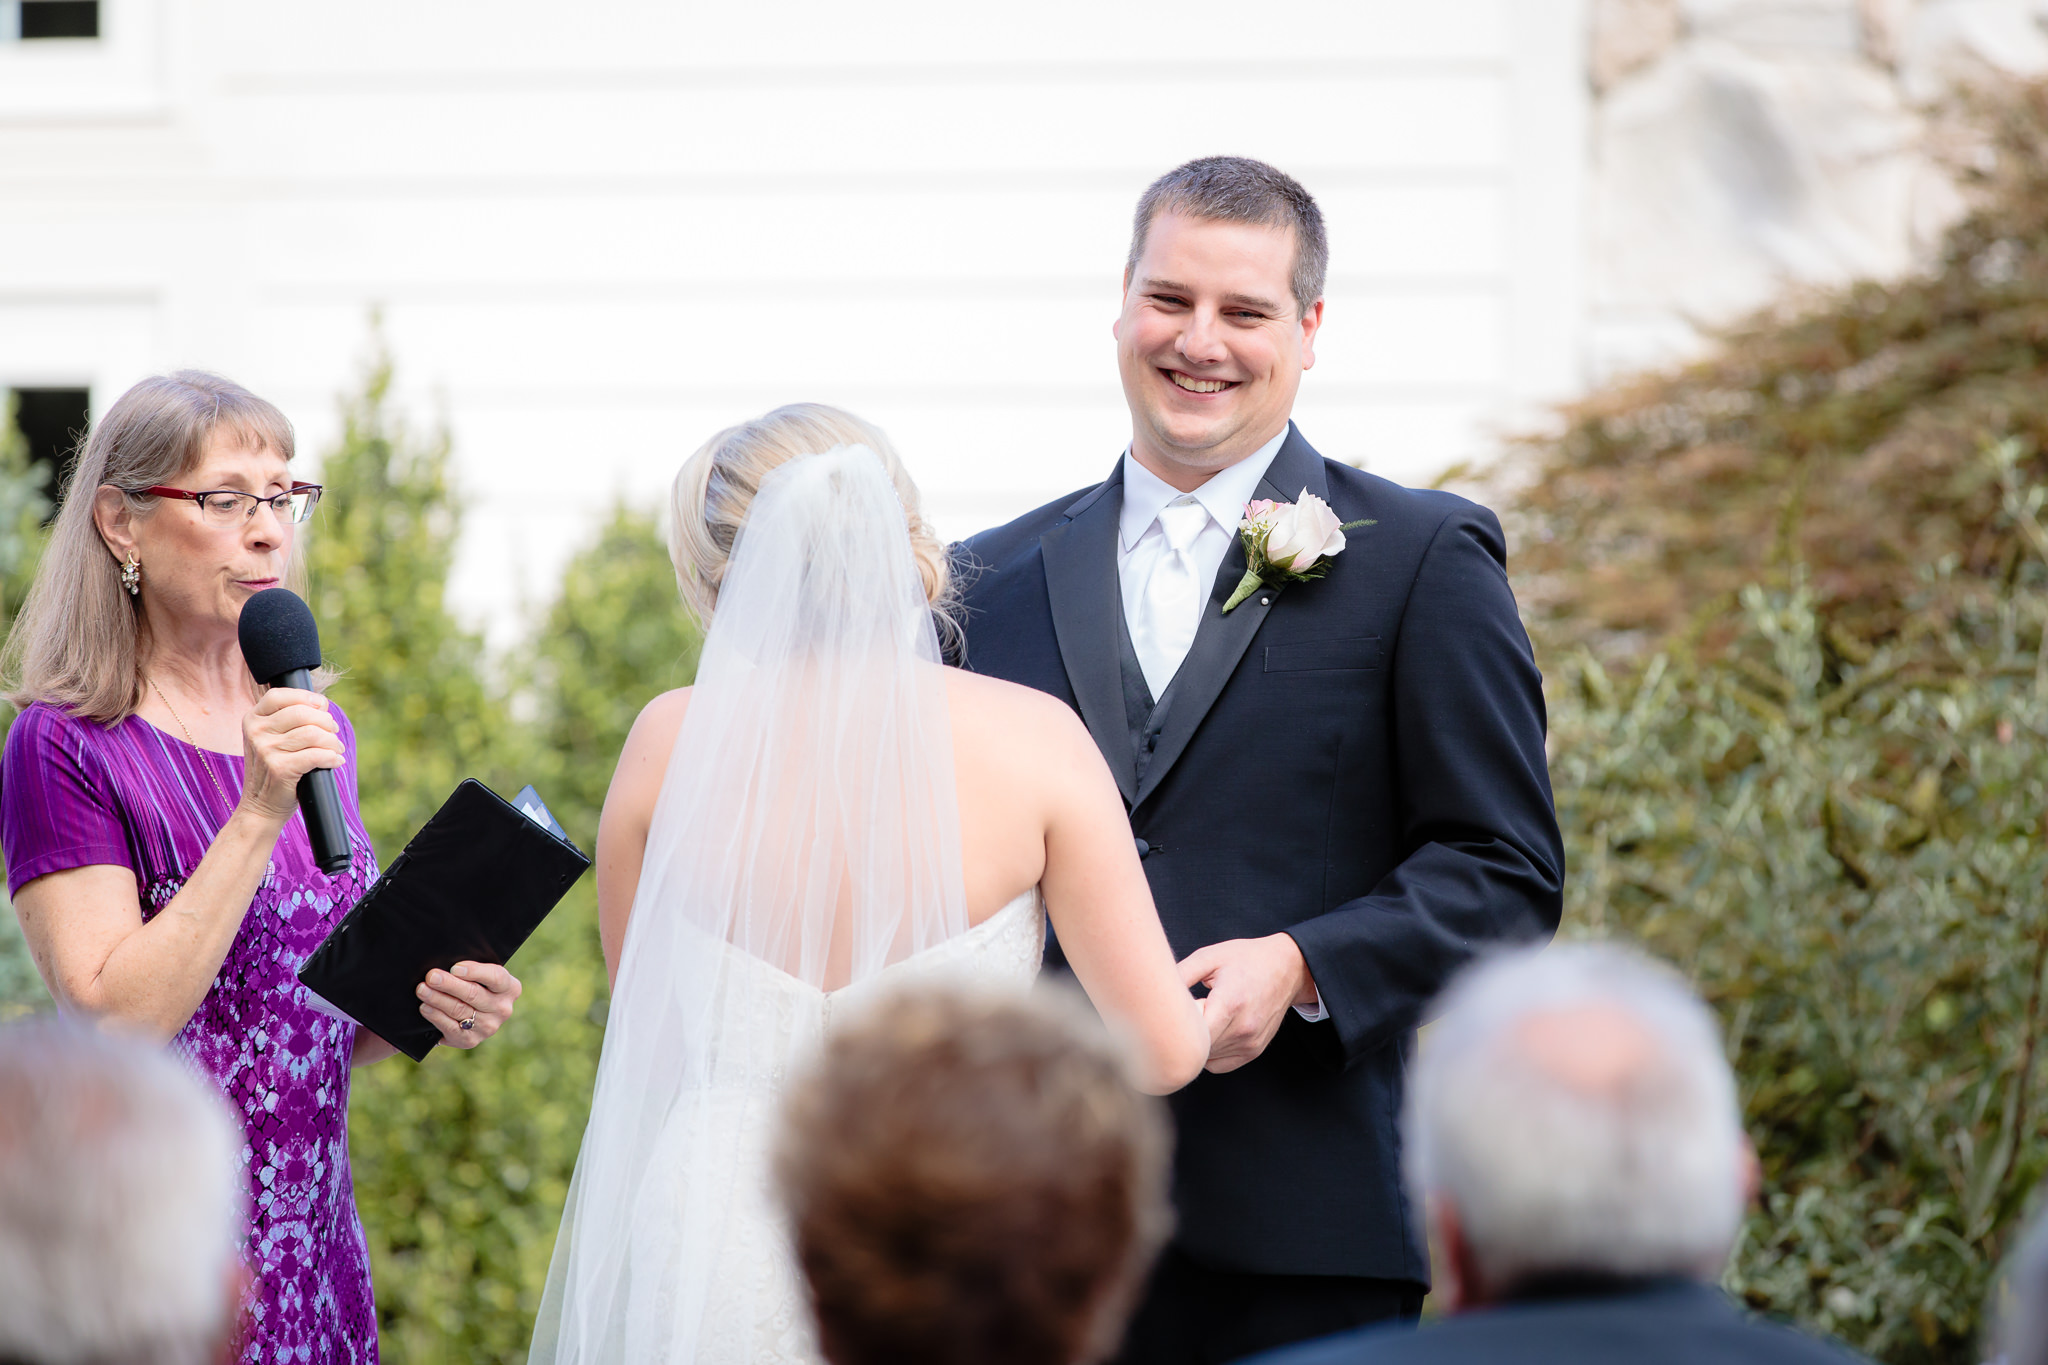 Groom laughs during the ceremony at Greystone Fields